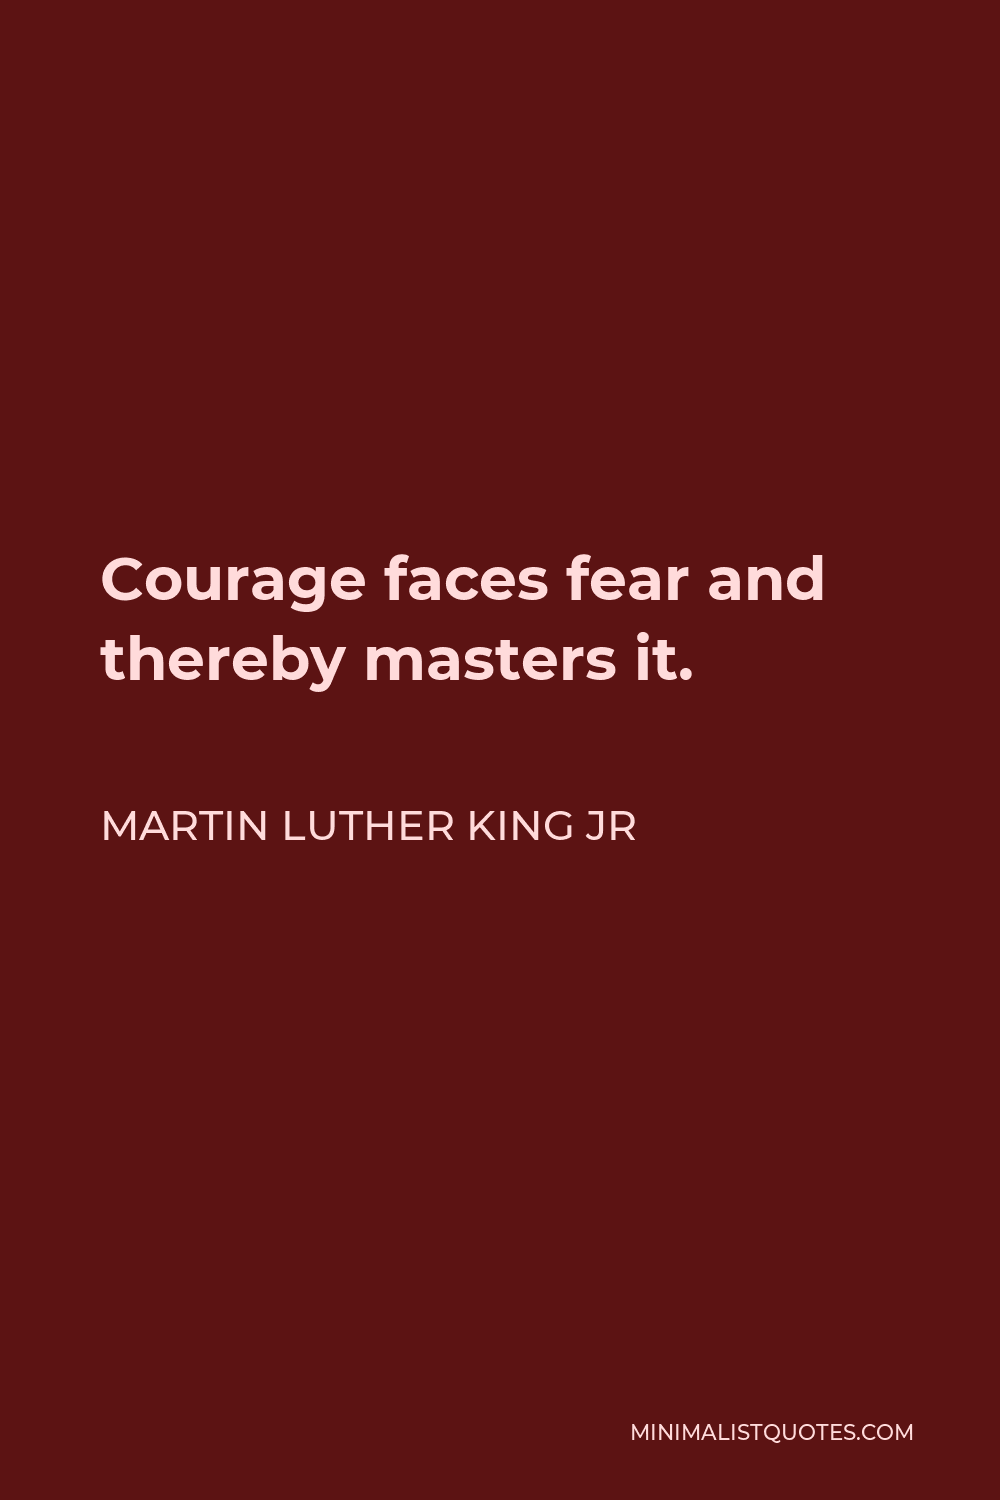 Martin Luther King Jr Quote - Courage faces fear and thereby masters it.